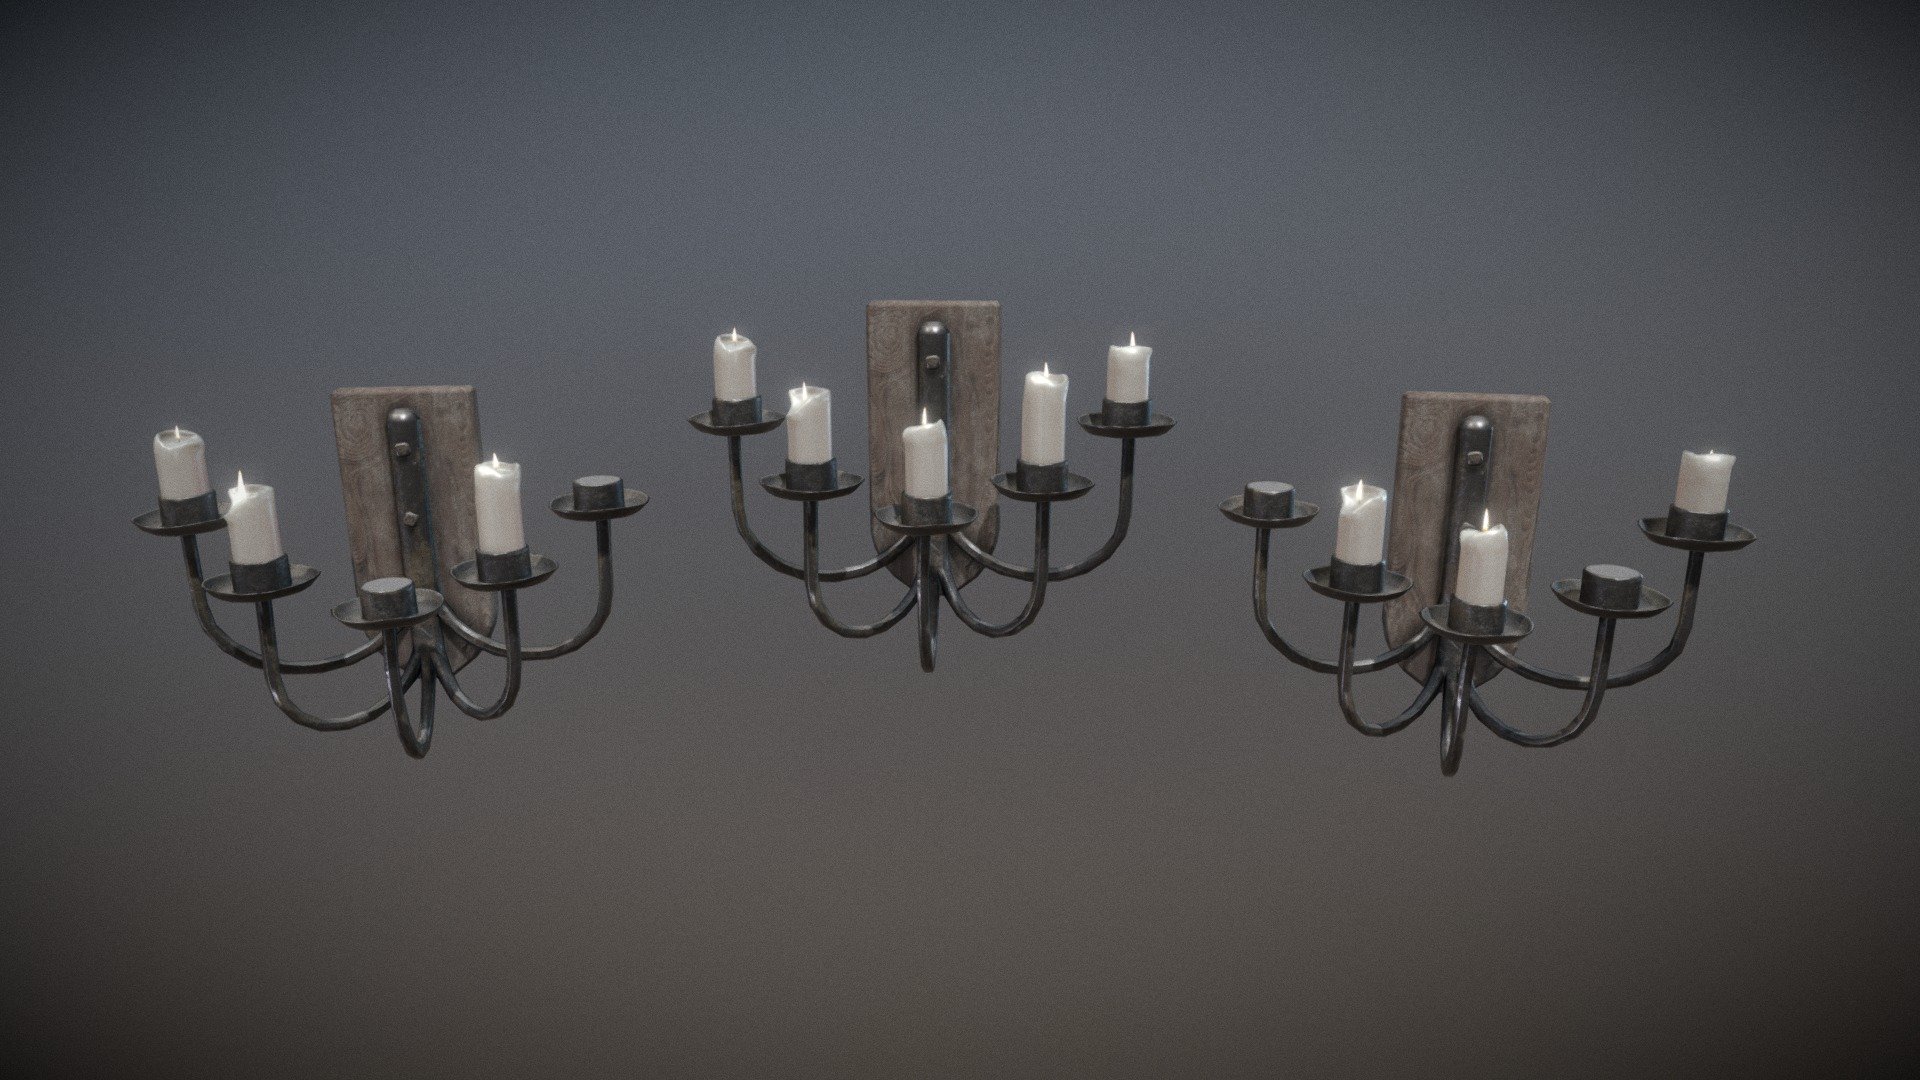 A set of 3, three poles wall chandelier

LODs done by hand at 50% increments

Part of the “Old Tavern” set - https://goo.gl/KuknSf Part of the “Old” series - https://goo.gl/XWypwo - Set of Wall Chandeliers - Buy Royalty Free 3D model by inedible.red (@inediblered) 3d model